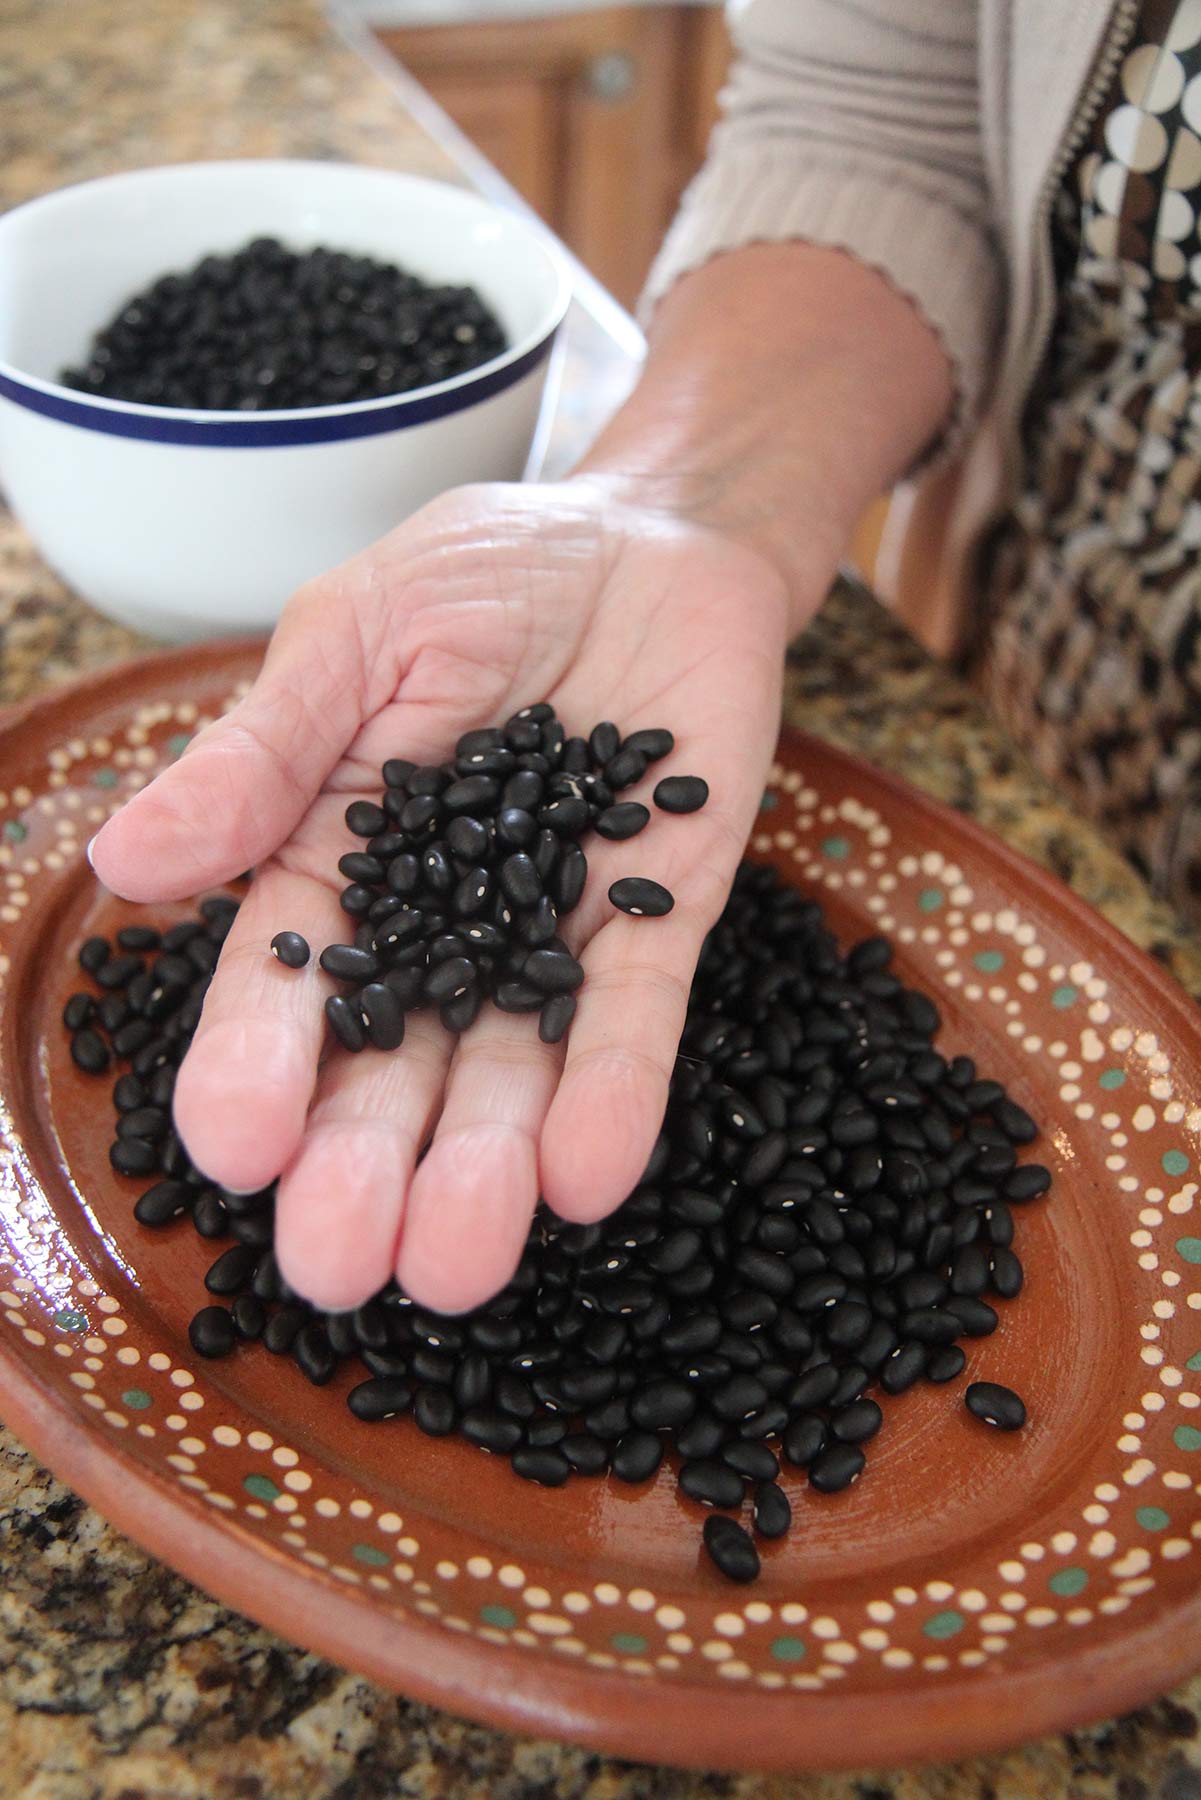 a hand holding dried black beans.